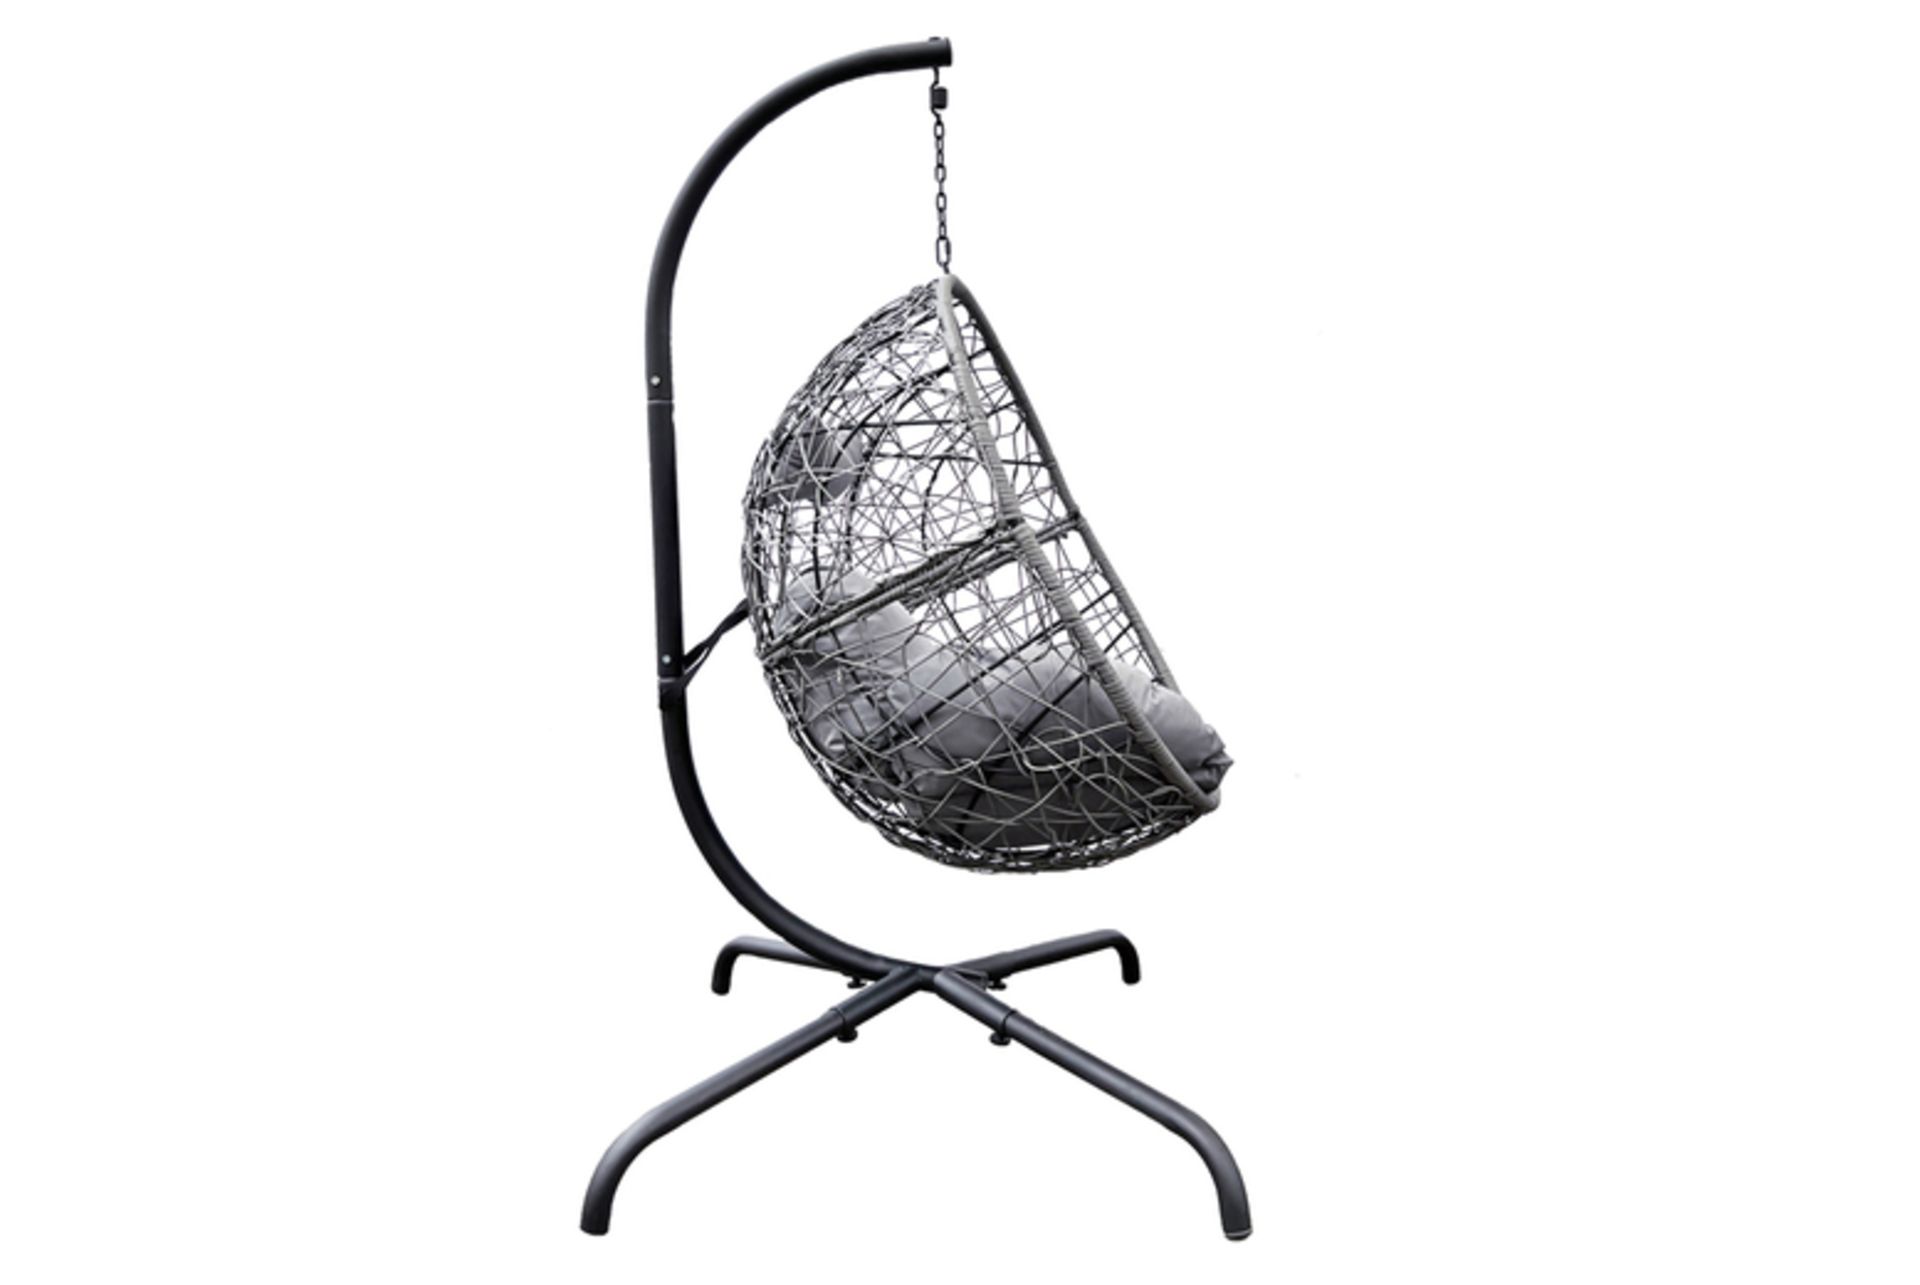 NEW RATTAN HANGING EGG CHAIR WITH A CUSHION AND PILLOW - GREY - Image 3 of 3